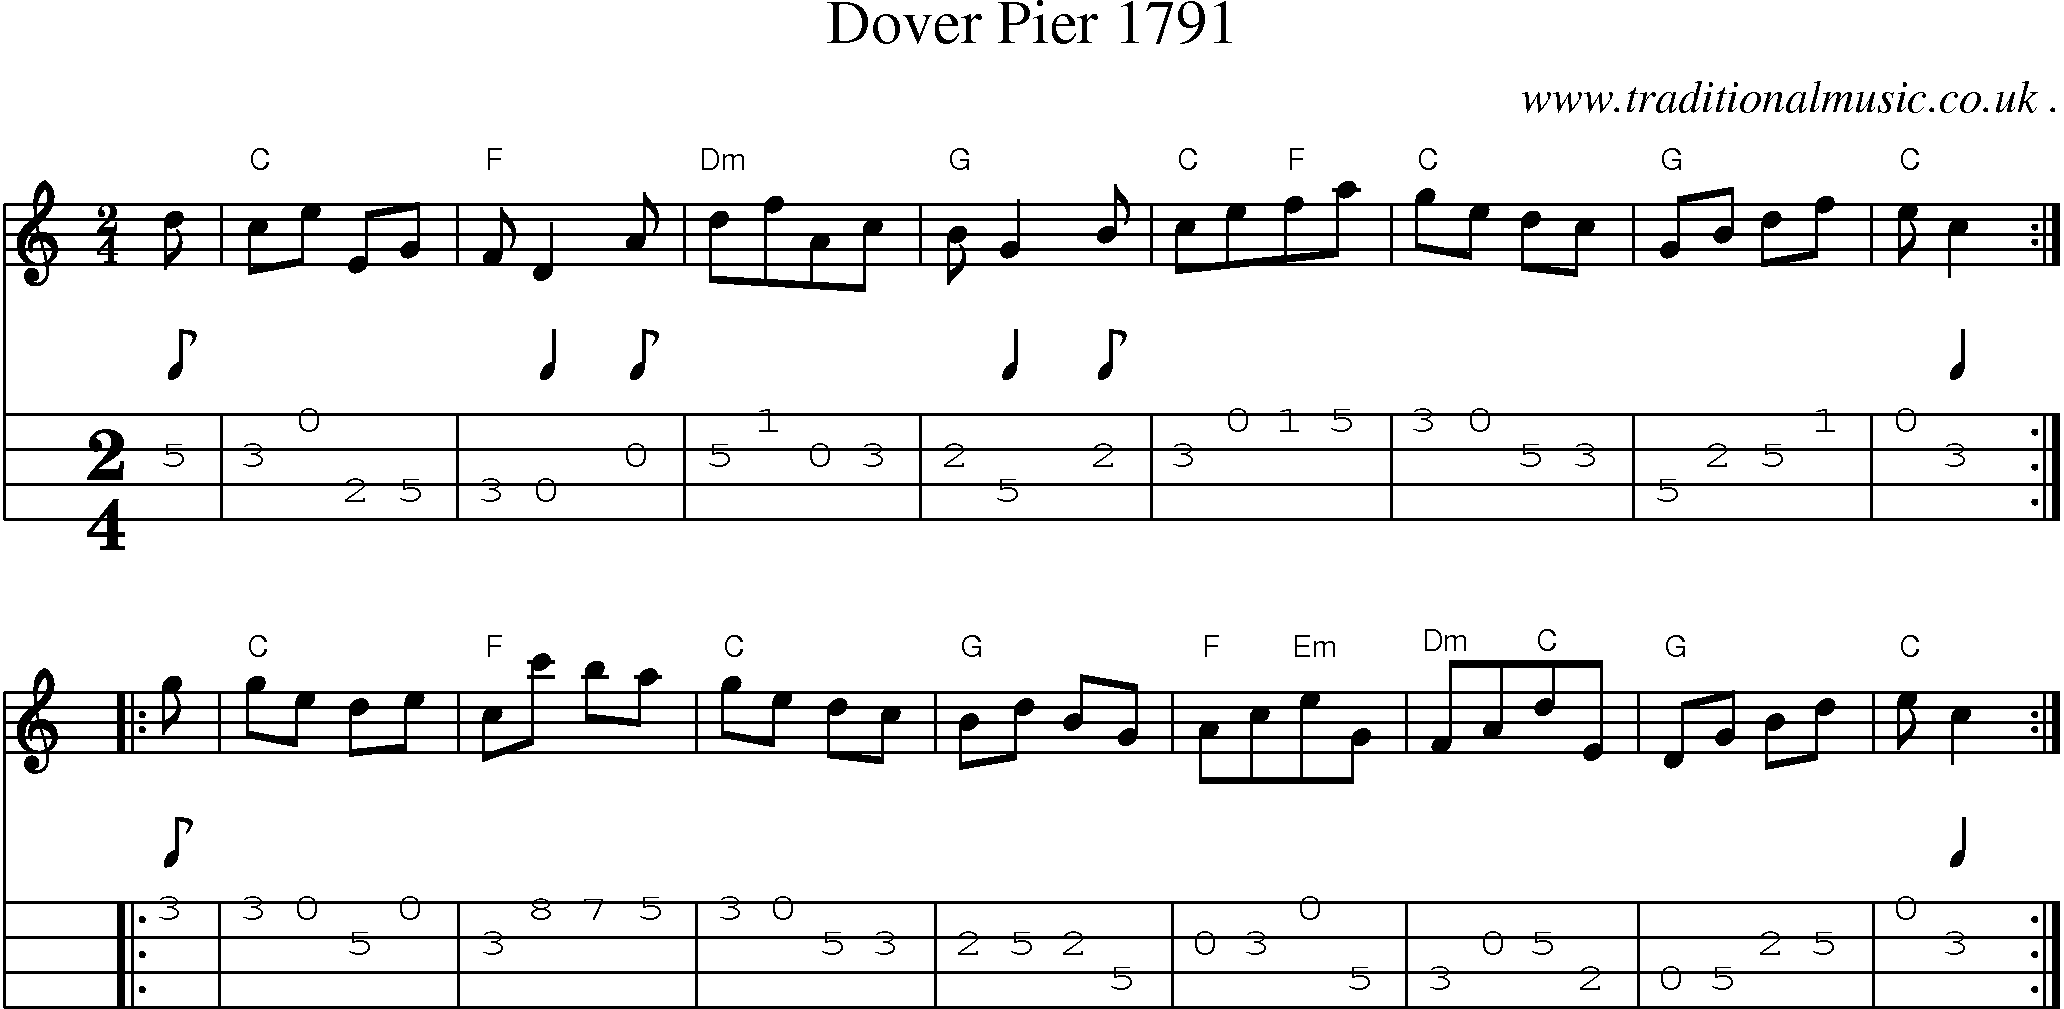 Sheet-Music and Mandolin Tabs for Dover Pier 1791